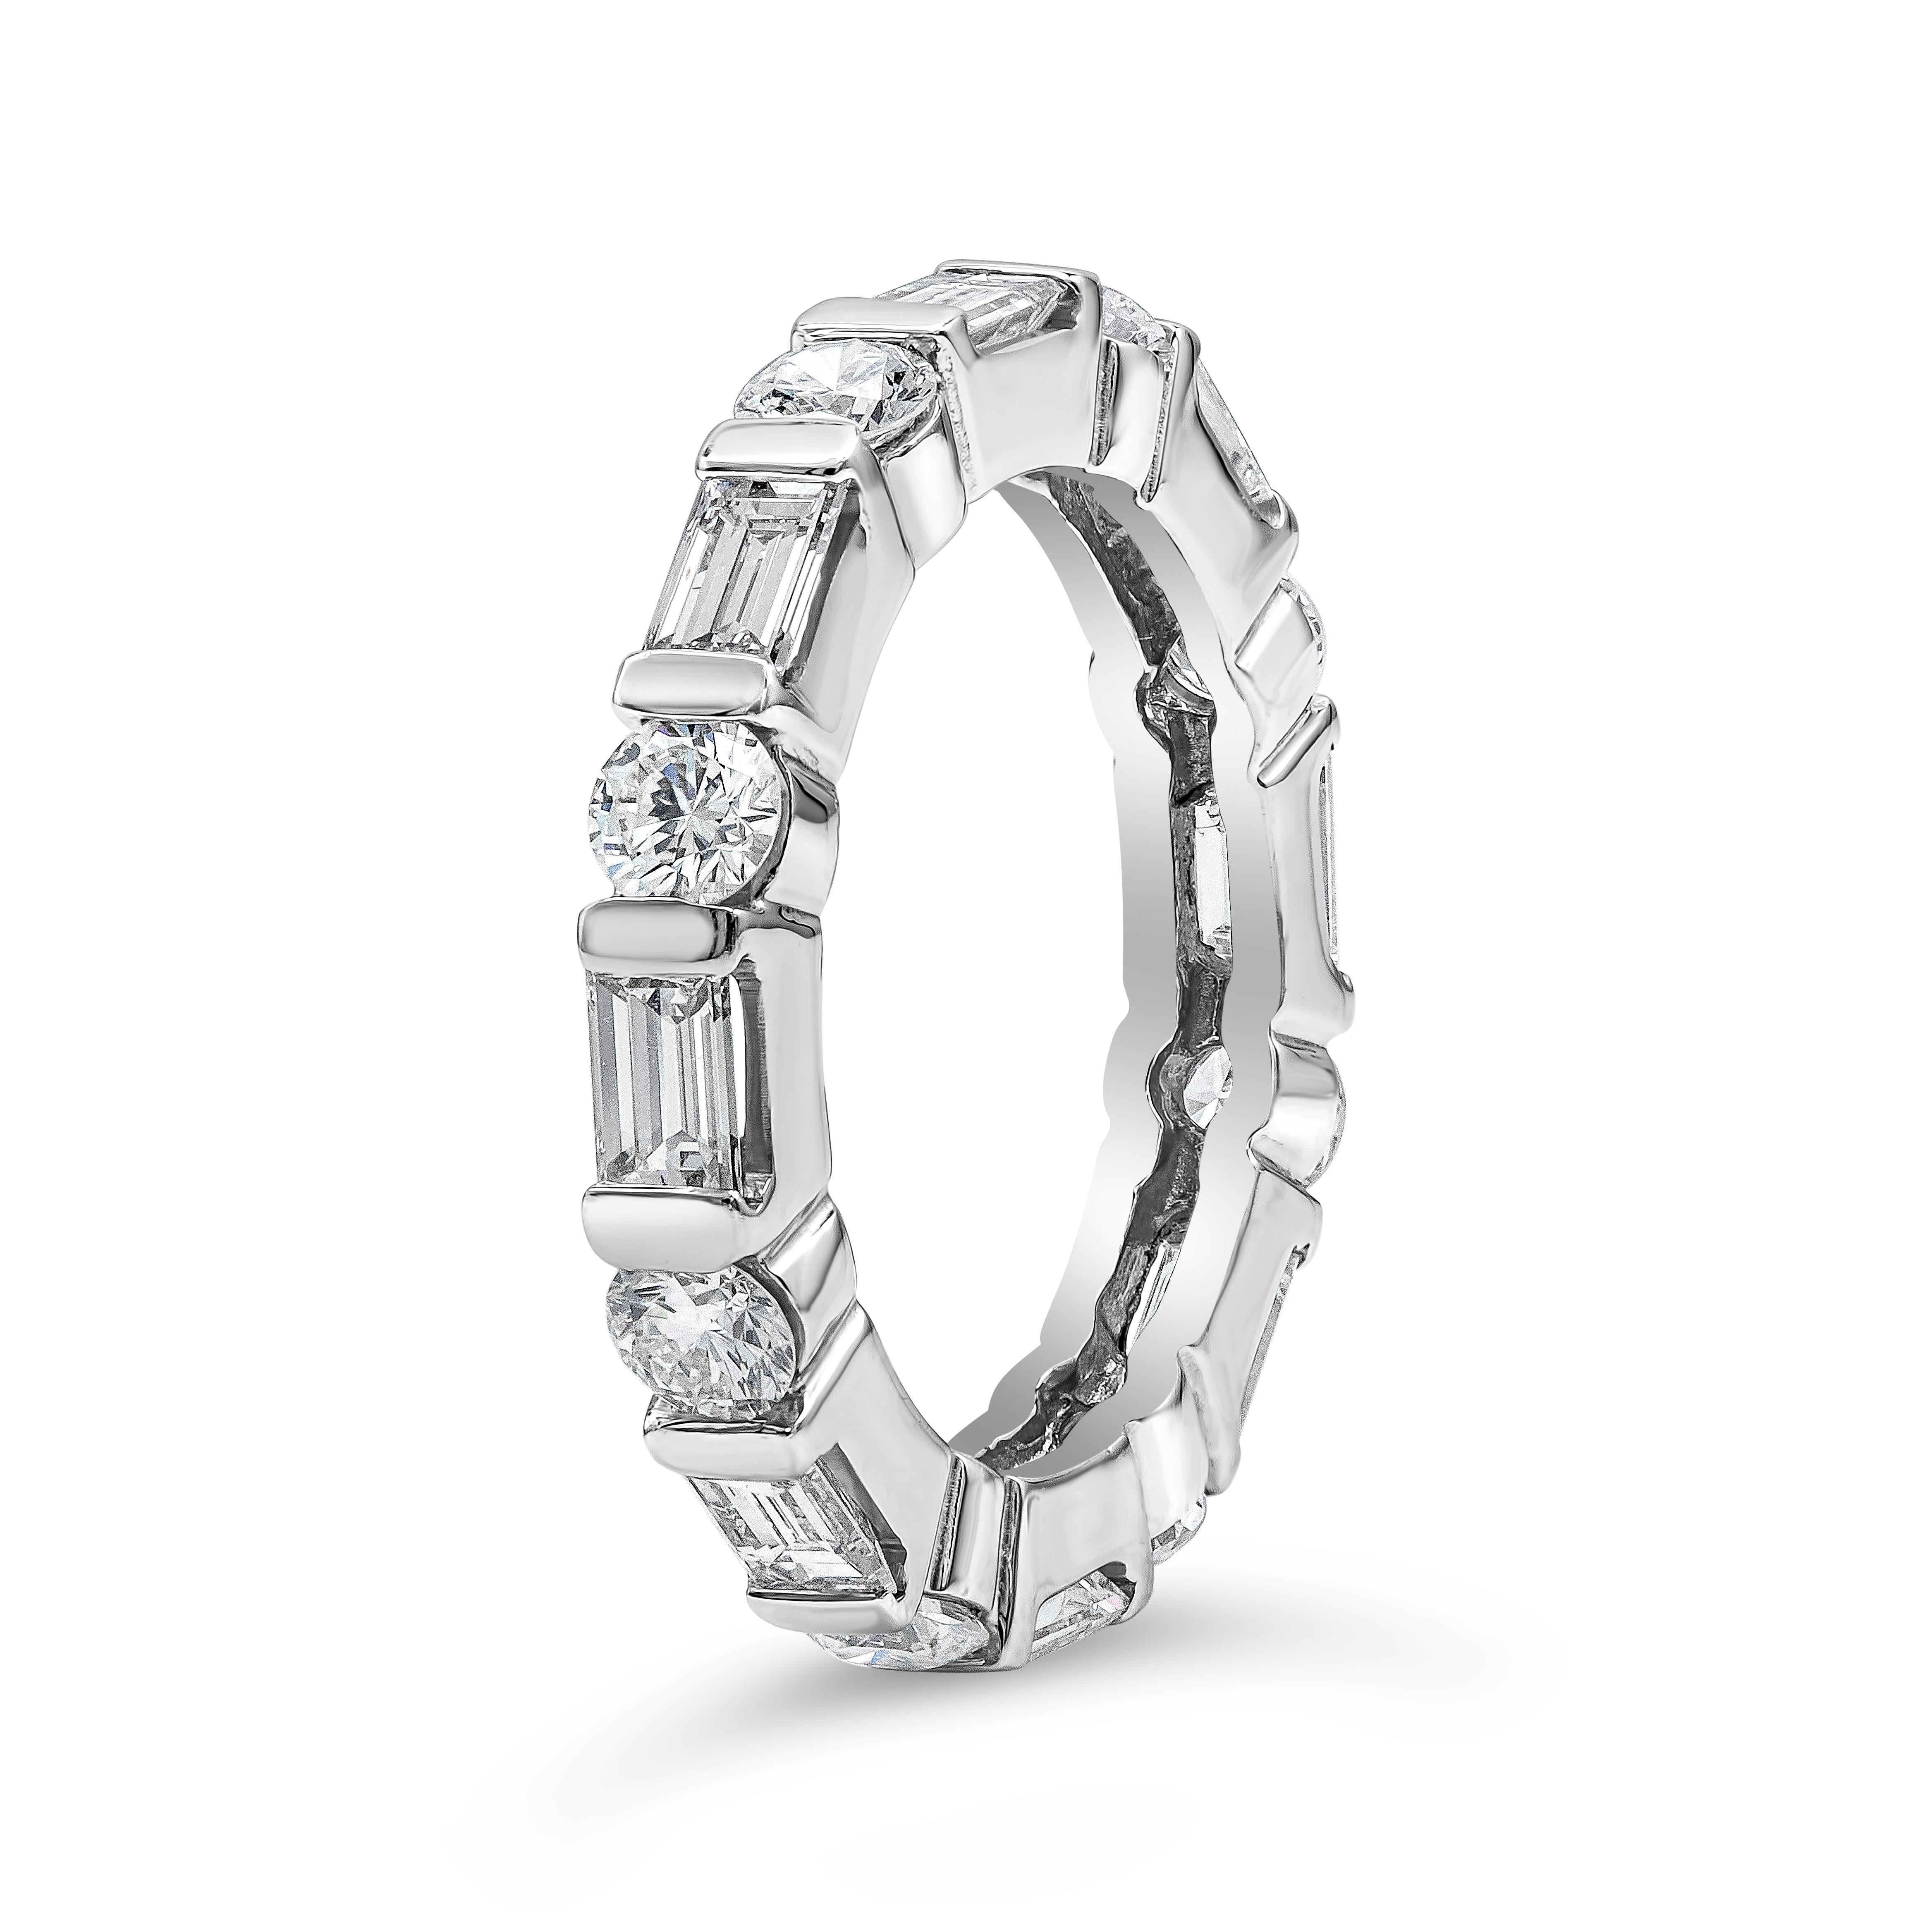 A unique eternity wedding band style, showcasing a baguette diamonds weighing 1.31 carats, elegantly alternating with round brilliant diamonds weighing 1.05 carats. Bar set, made with platinum. Size 5.75 US

Roman Malakov is a custom house,